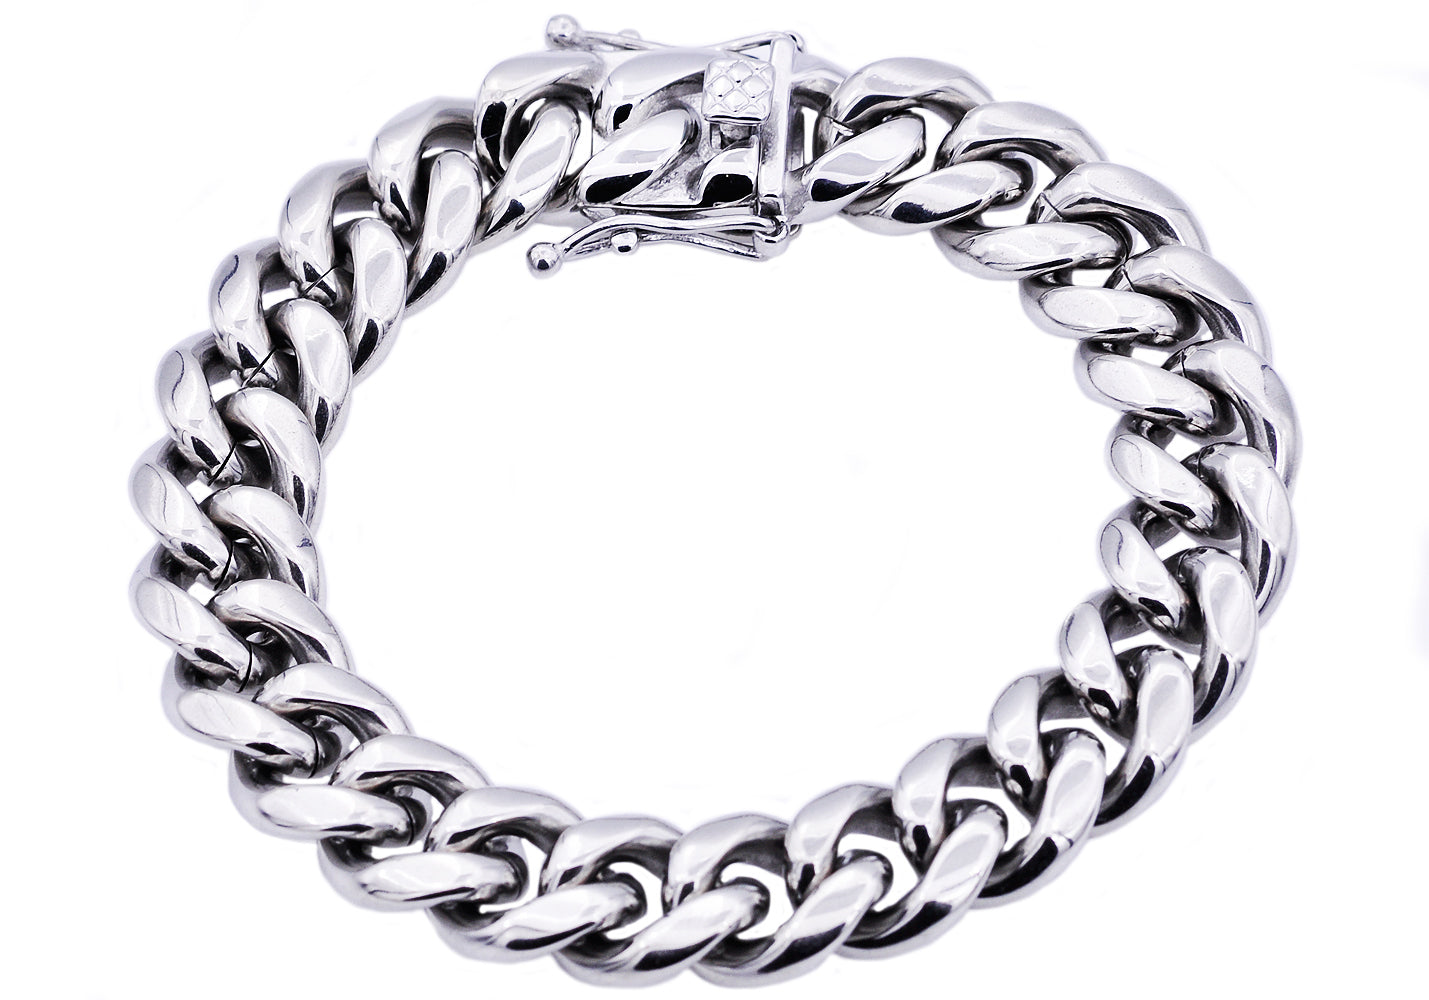 Mens 14mm Stainless Steel Cuban Link Chain Bracelet With Box Clasp